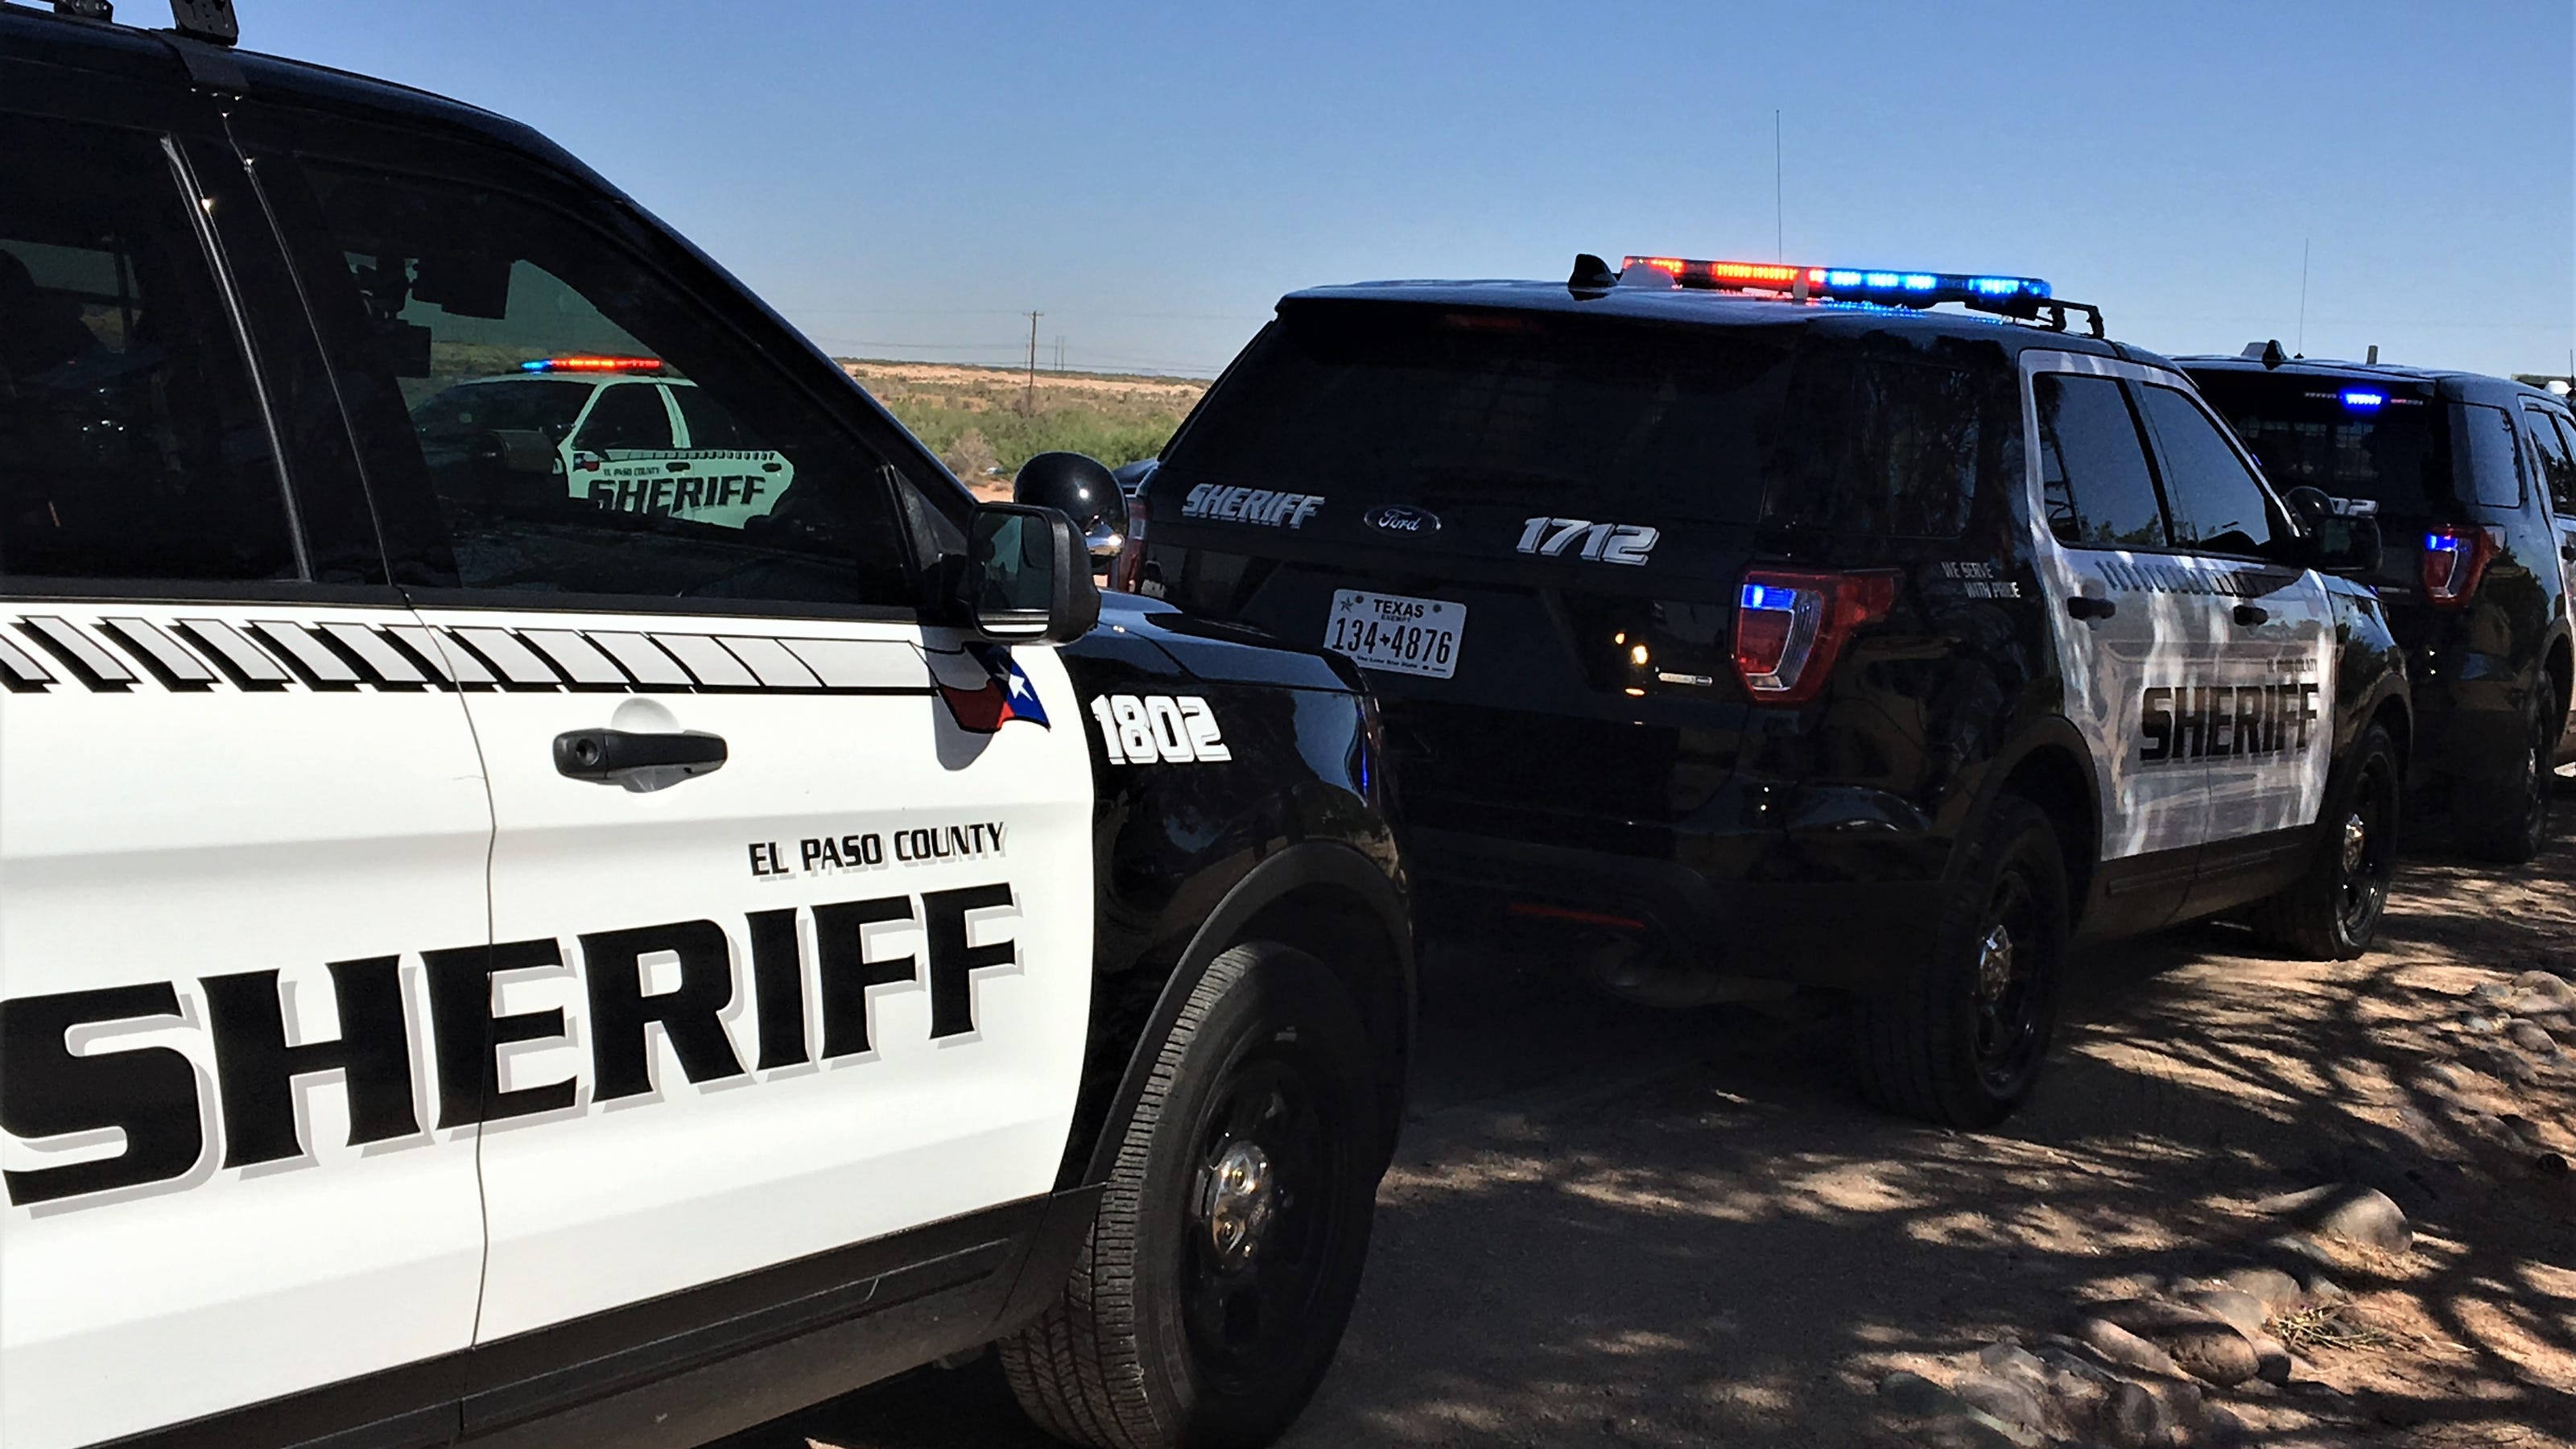 El Paso County Sheriff's Office has identified the 35-year-old motorcy...